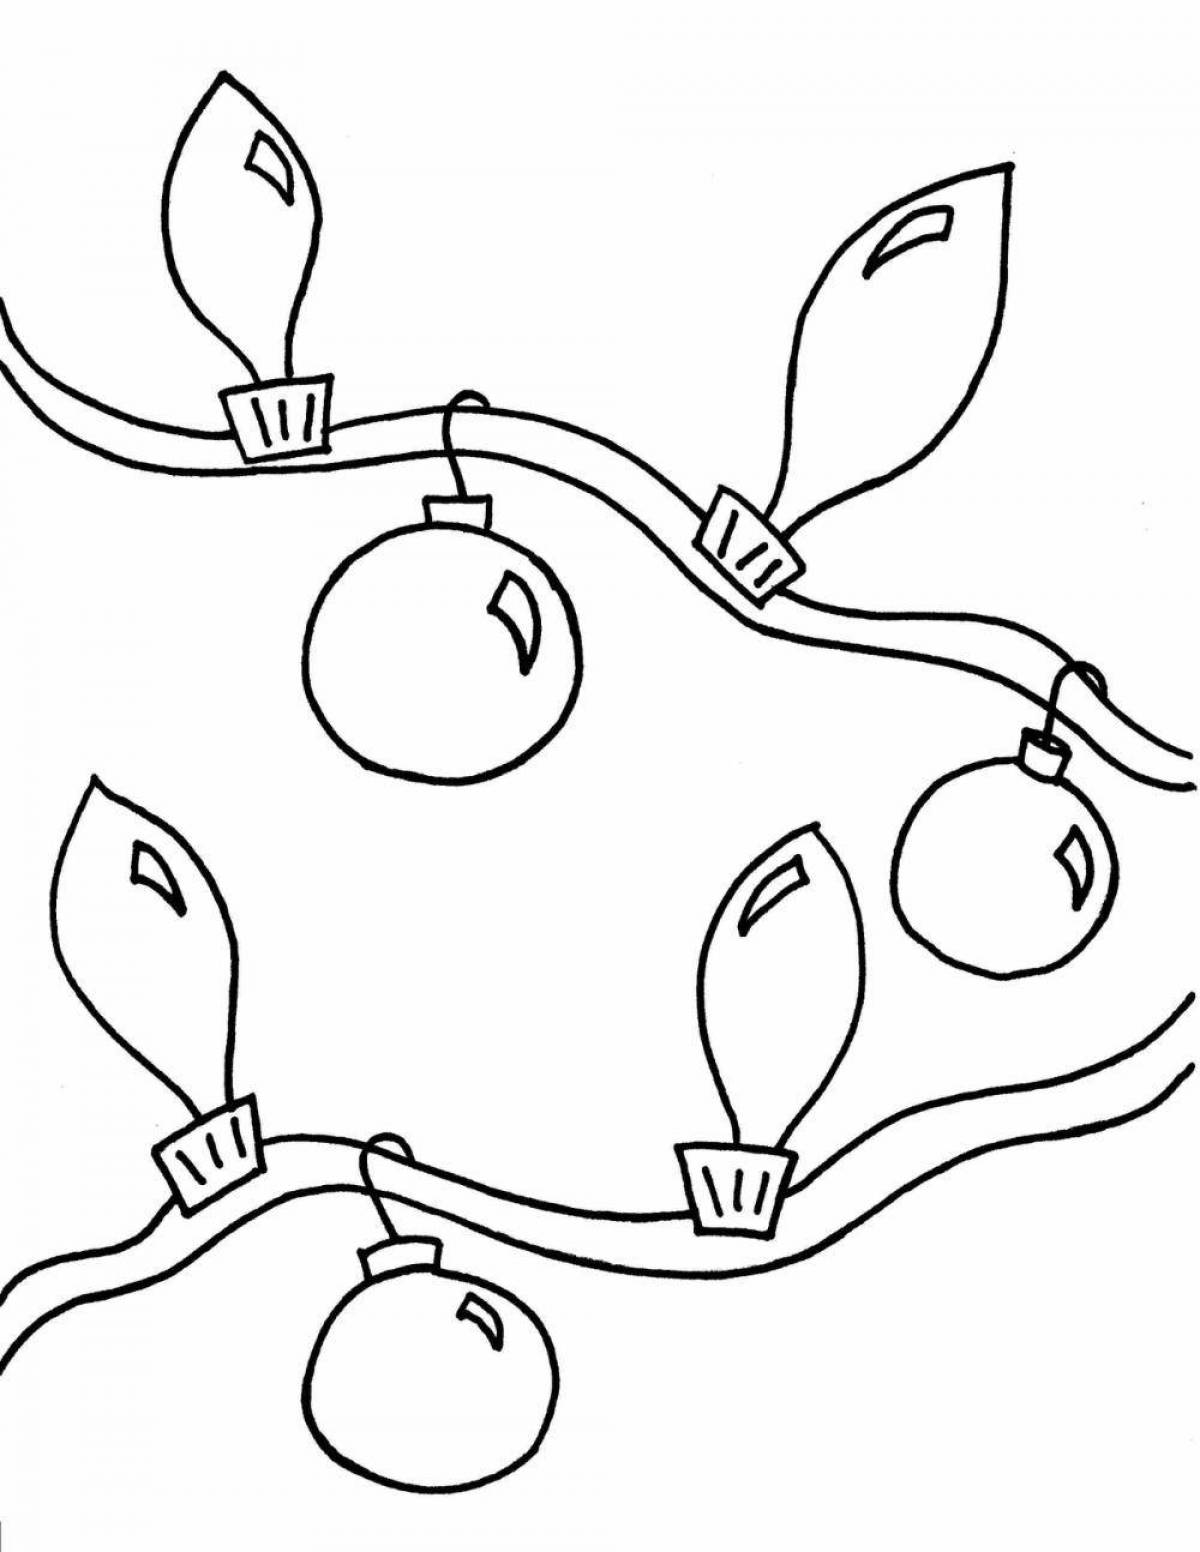 Glitter Christmas garland coloring page